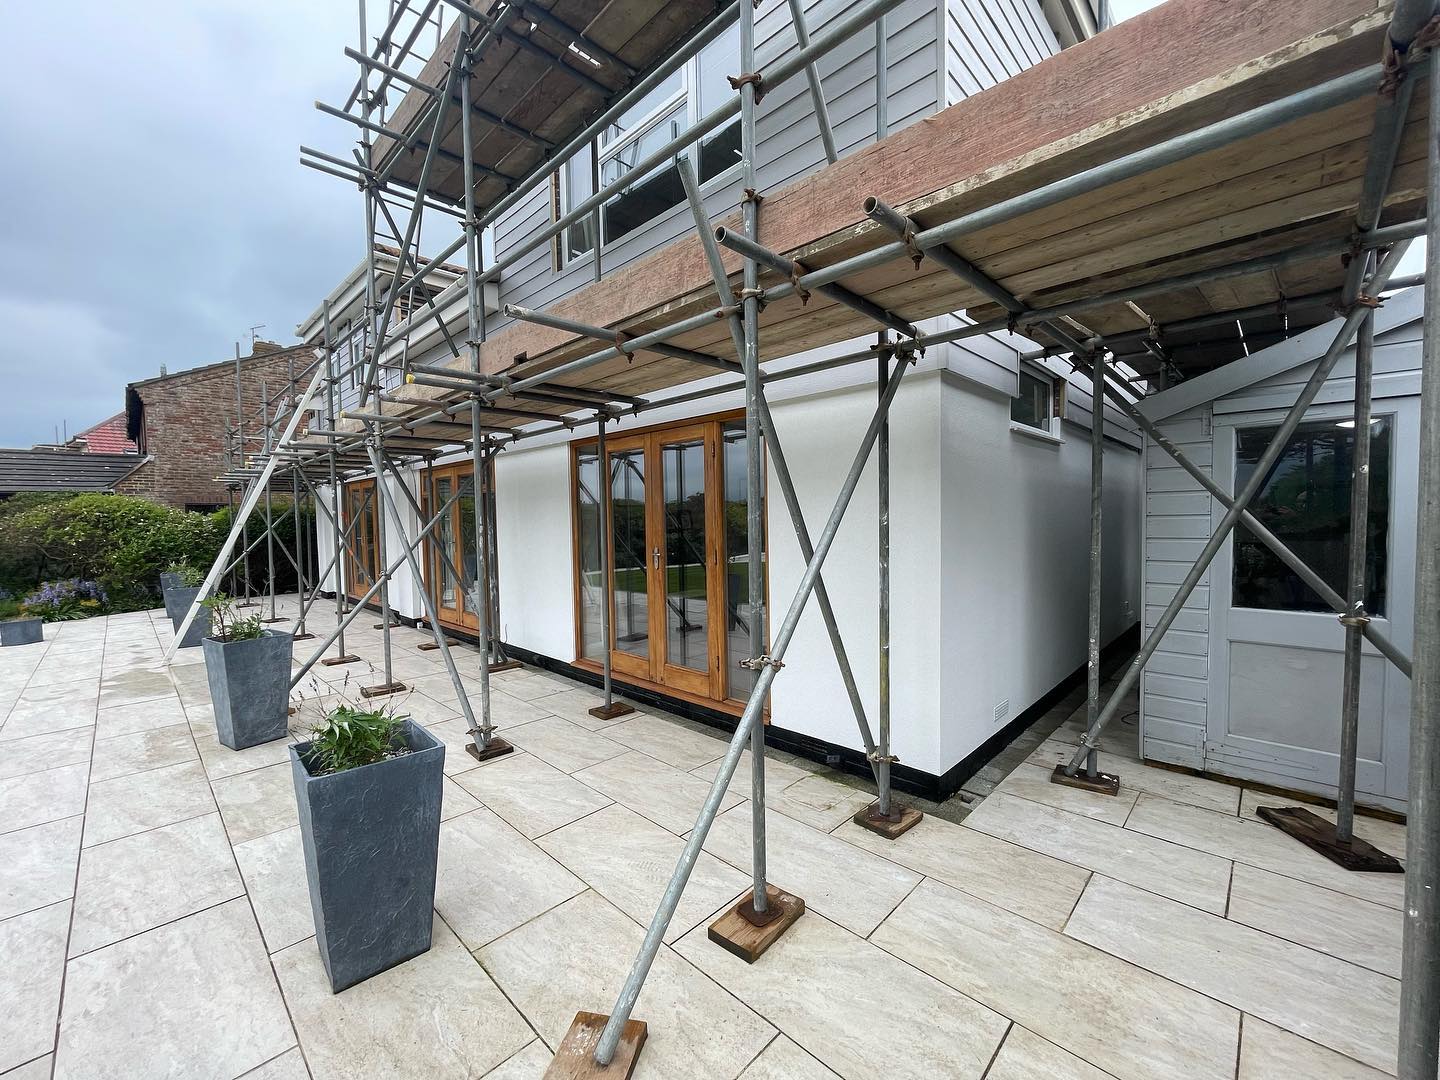 Exterior of a house with scaffolding for renovation work and external wall insulation.